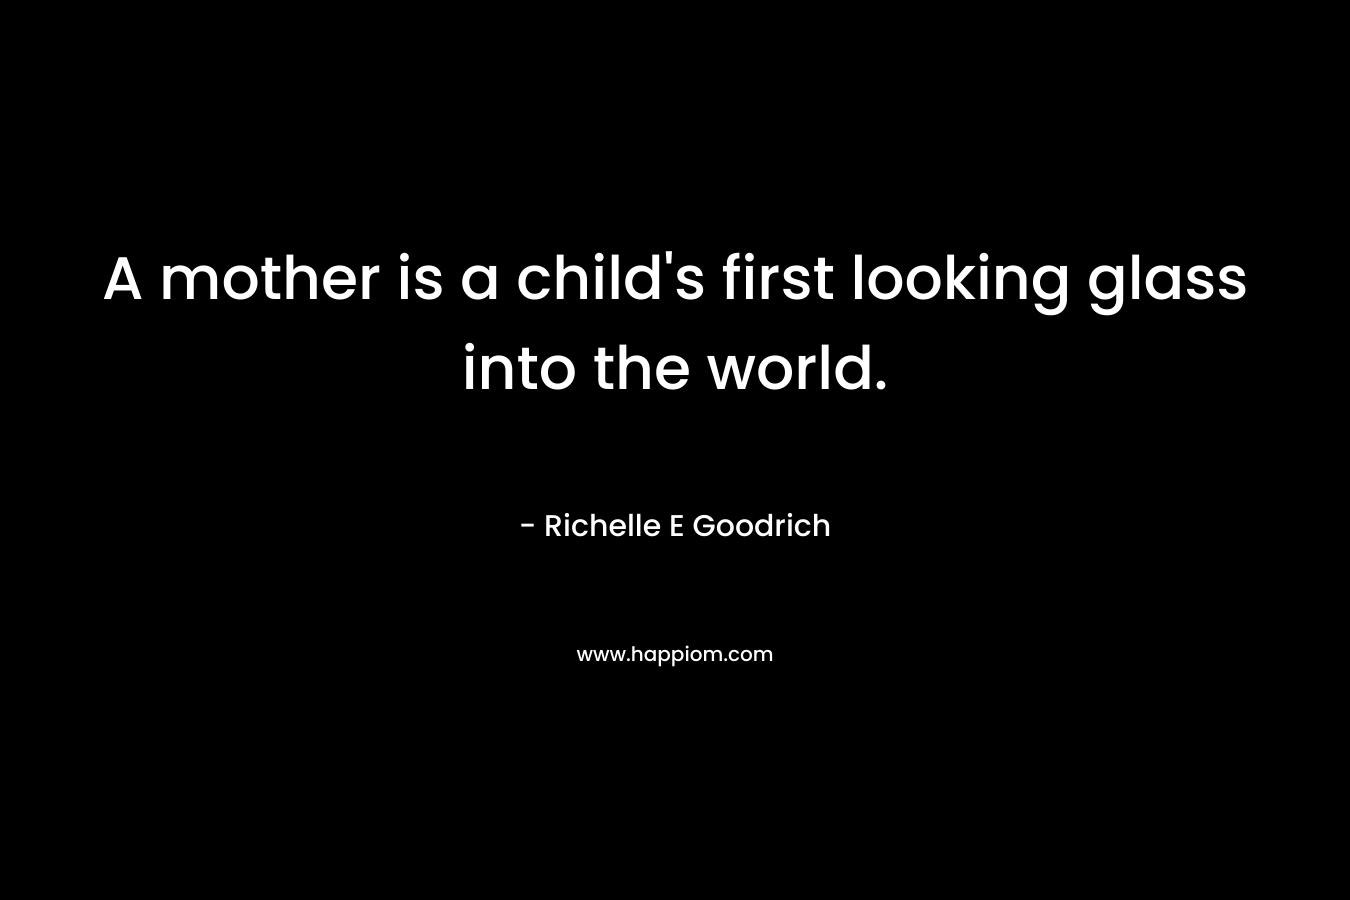 A mother is a child's first looking glass into the world.